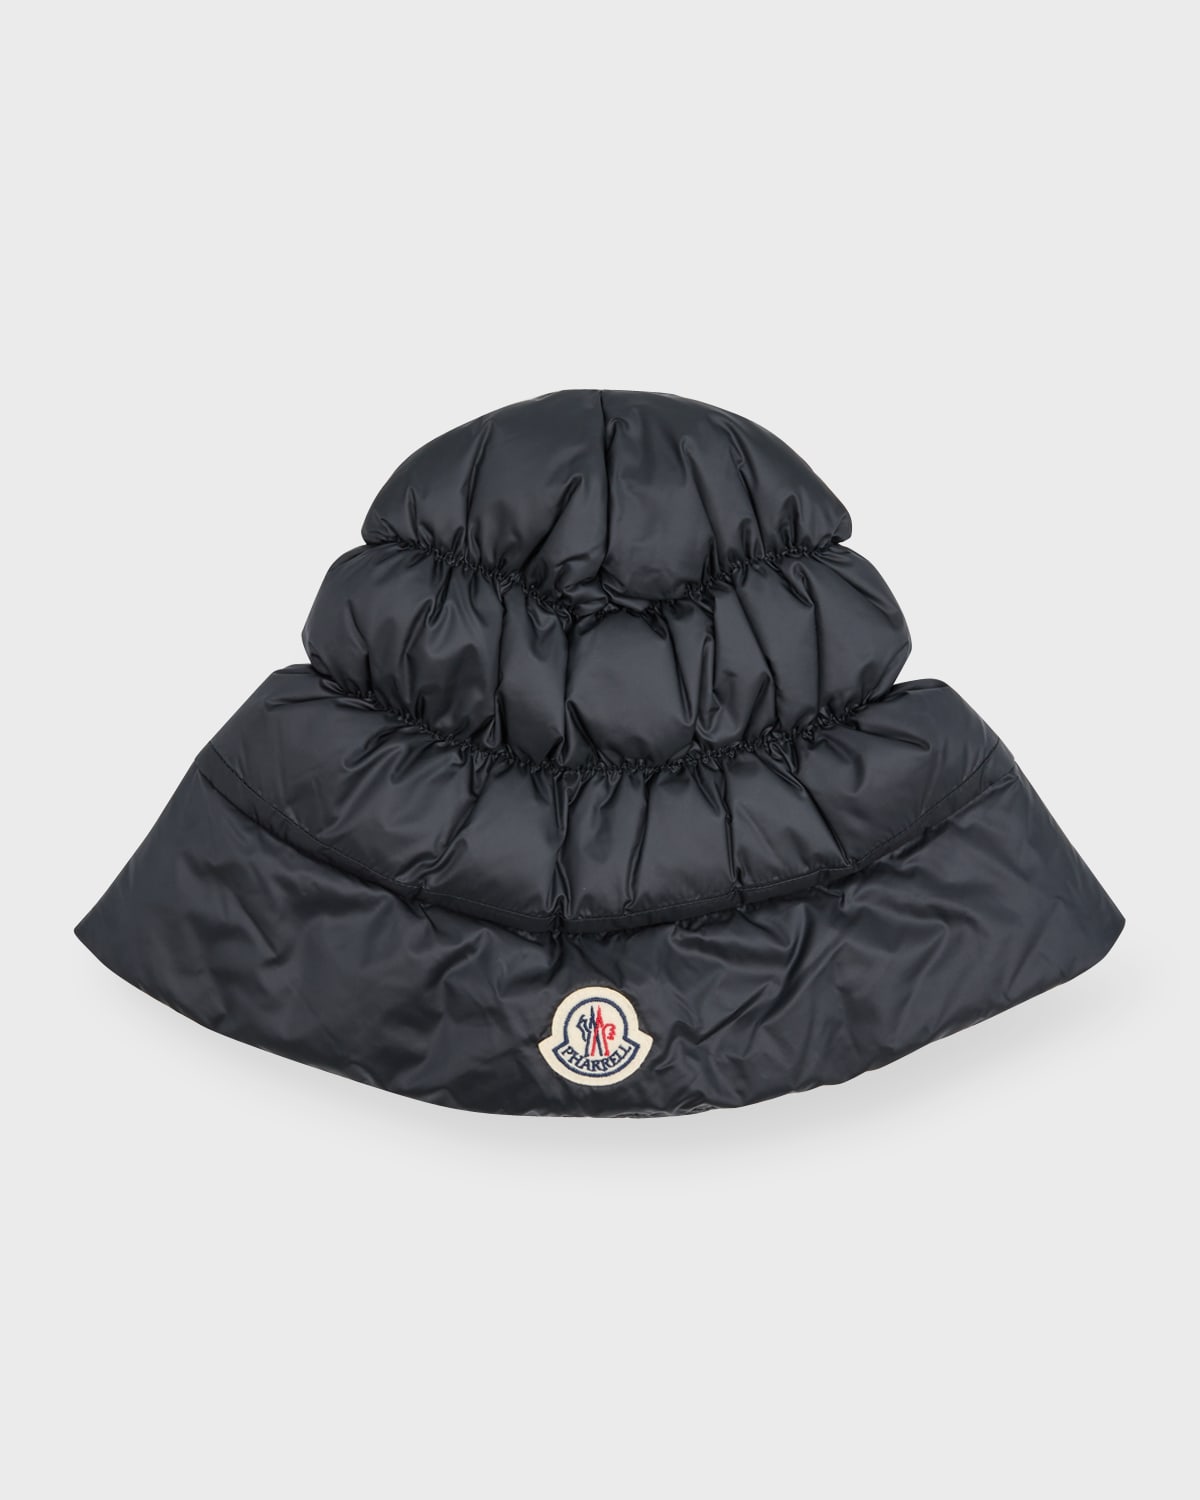 Moncler x Pharrell Williams Men's Quilted Bucket Hat